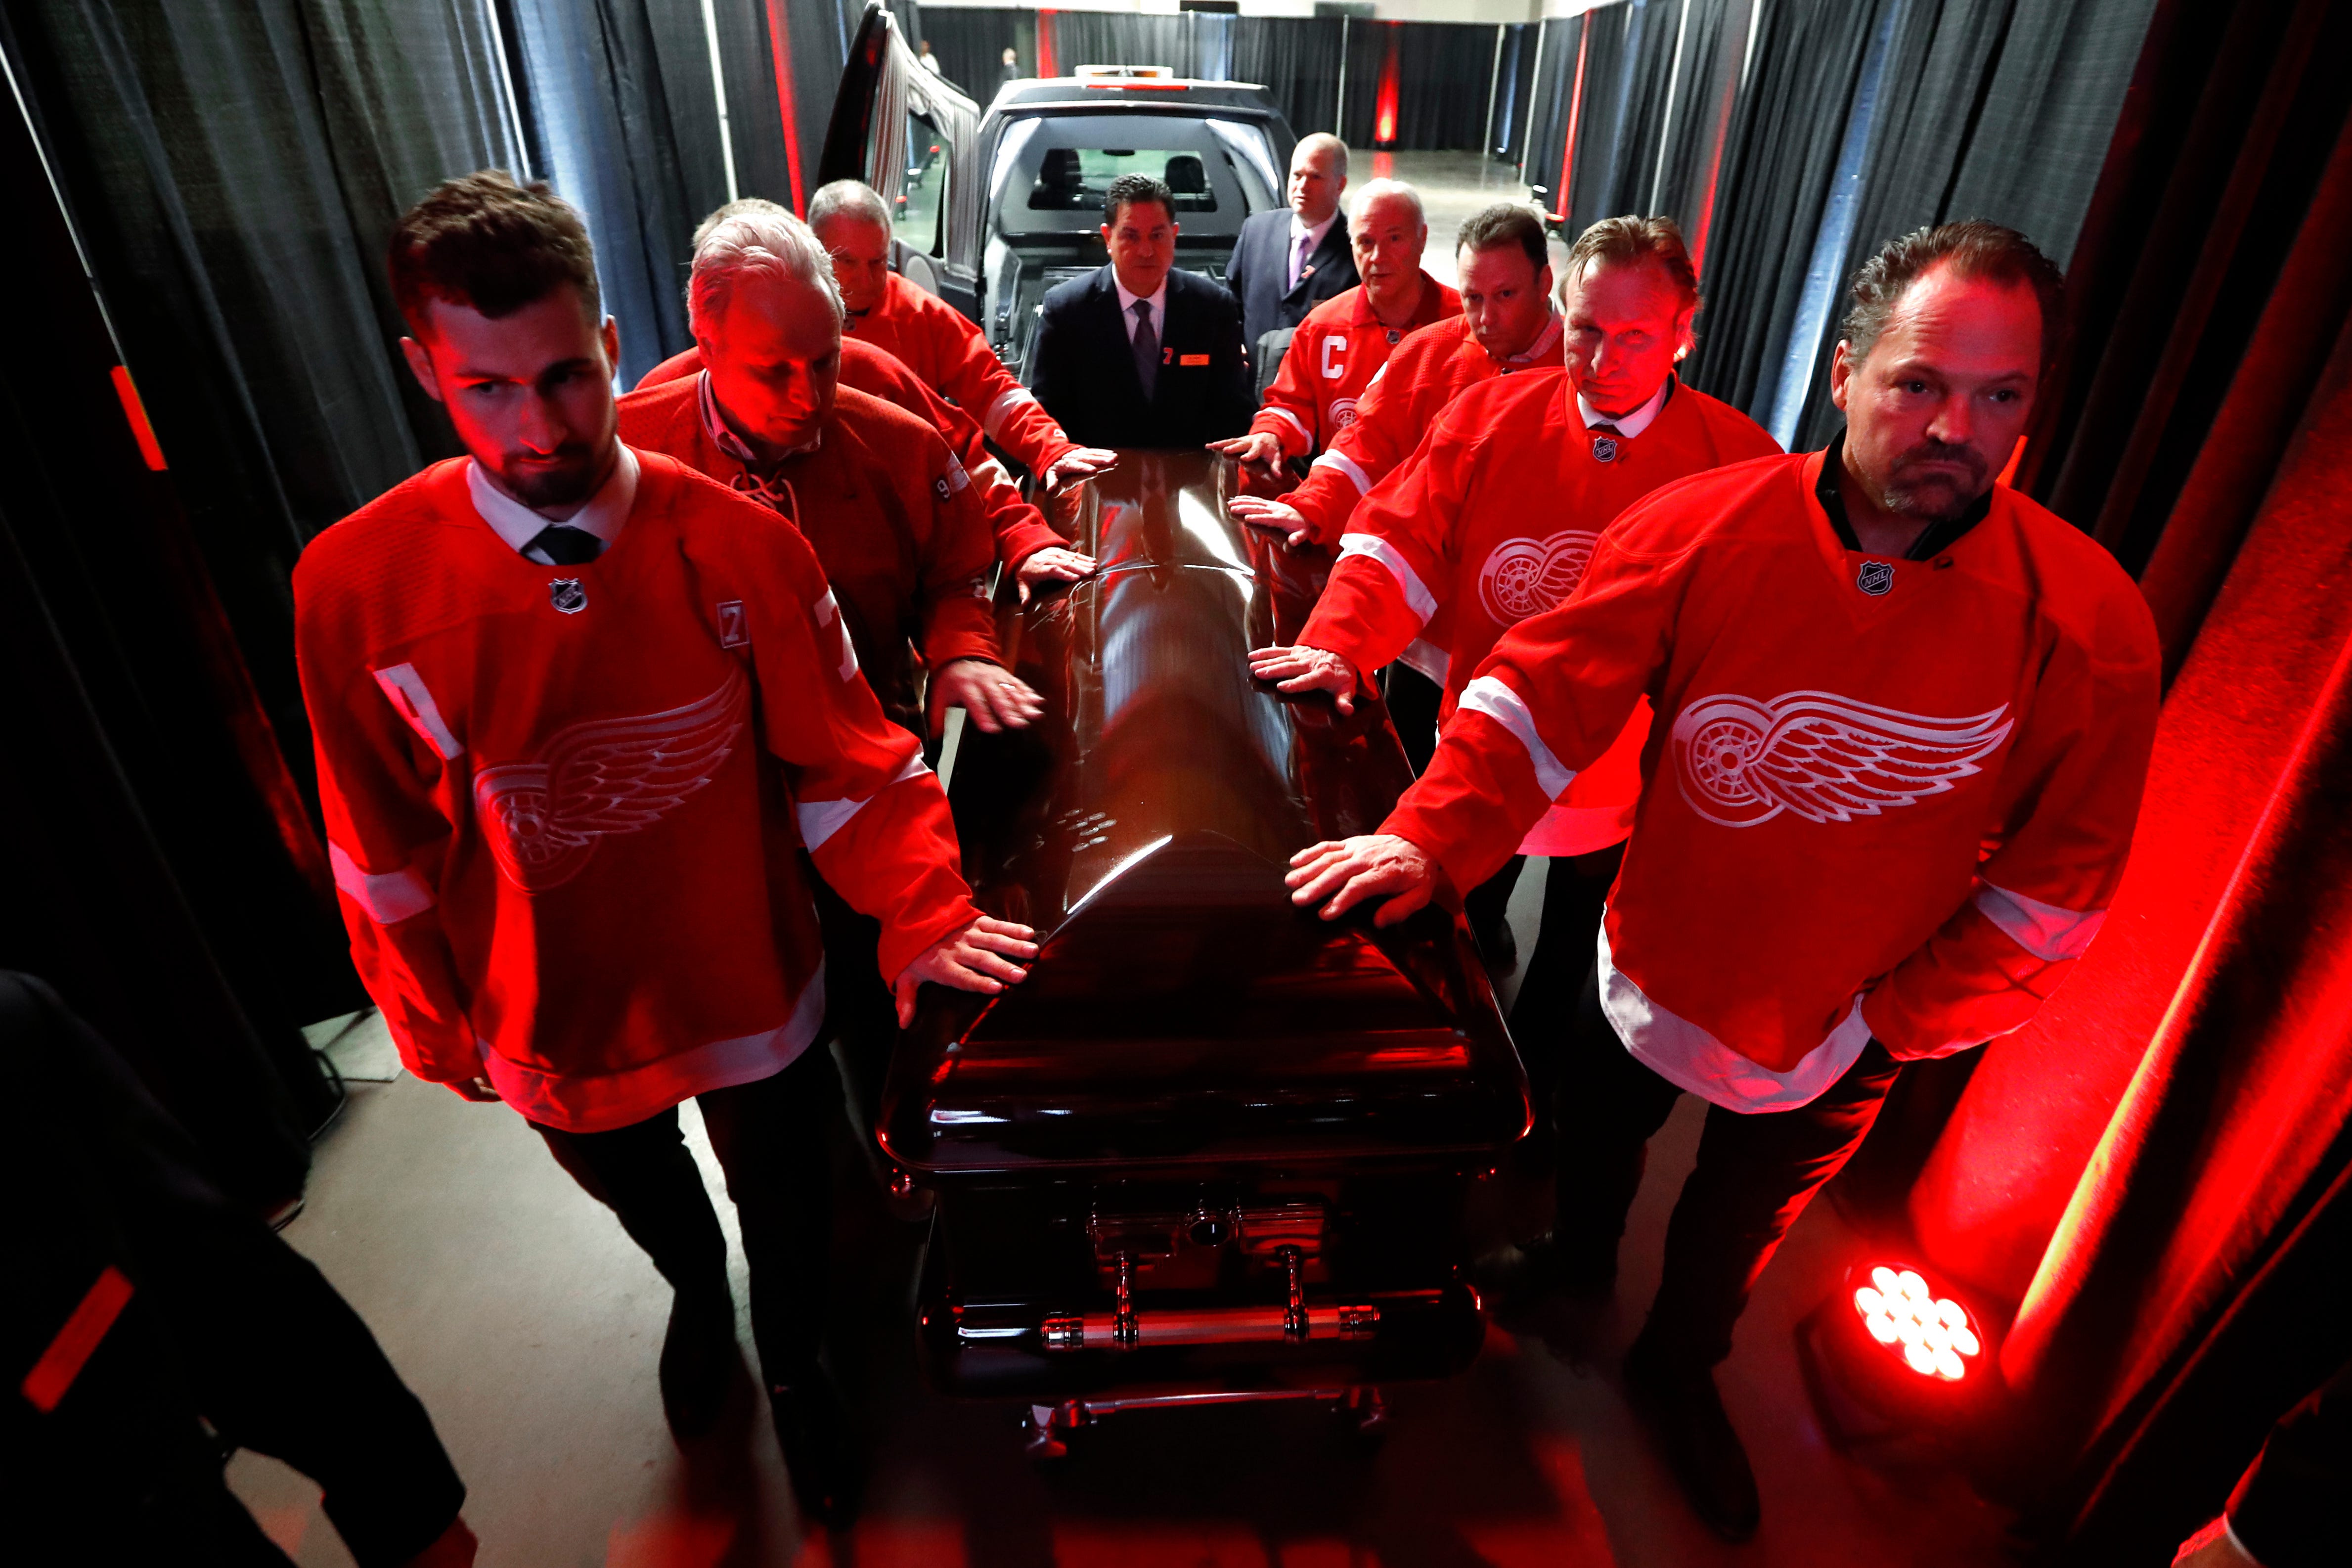 Pallbearers including Dylan Larkin, left, and Joe Kocur move the casket of former Detroit Red Wings player Ted Lindsay for the public viewing Friday, March 8, 2019, at Little Caesars Arena in Detroit.